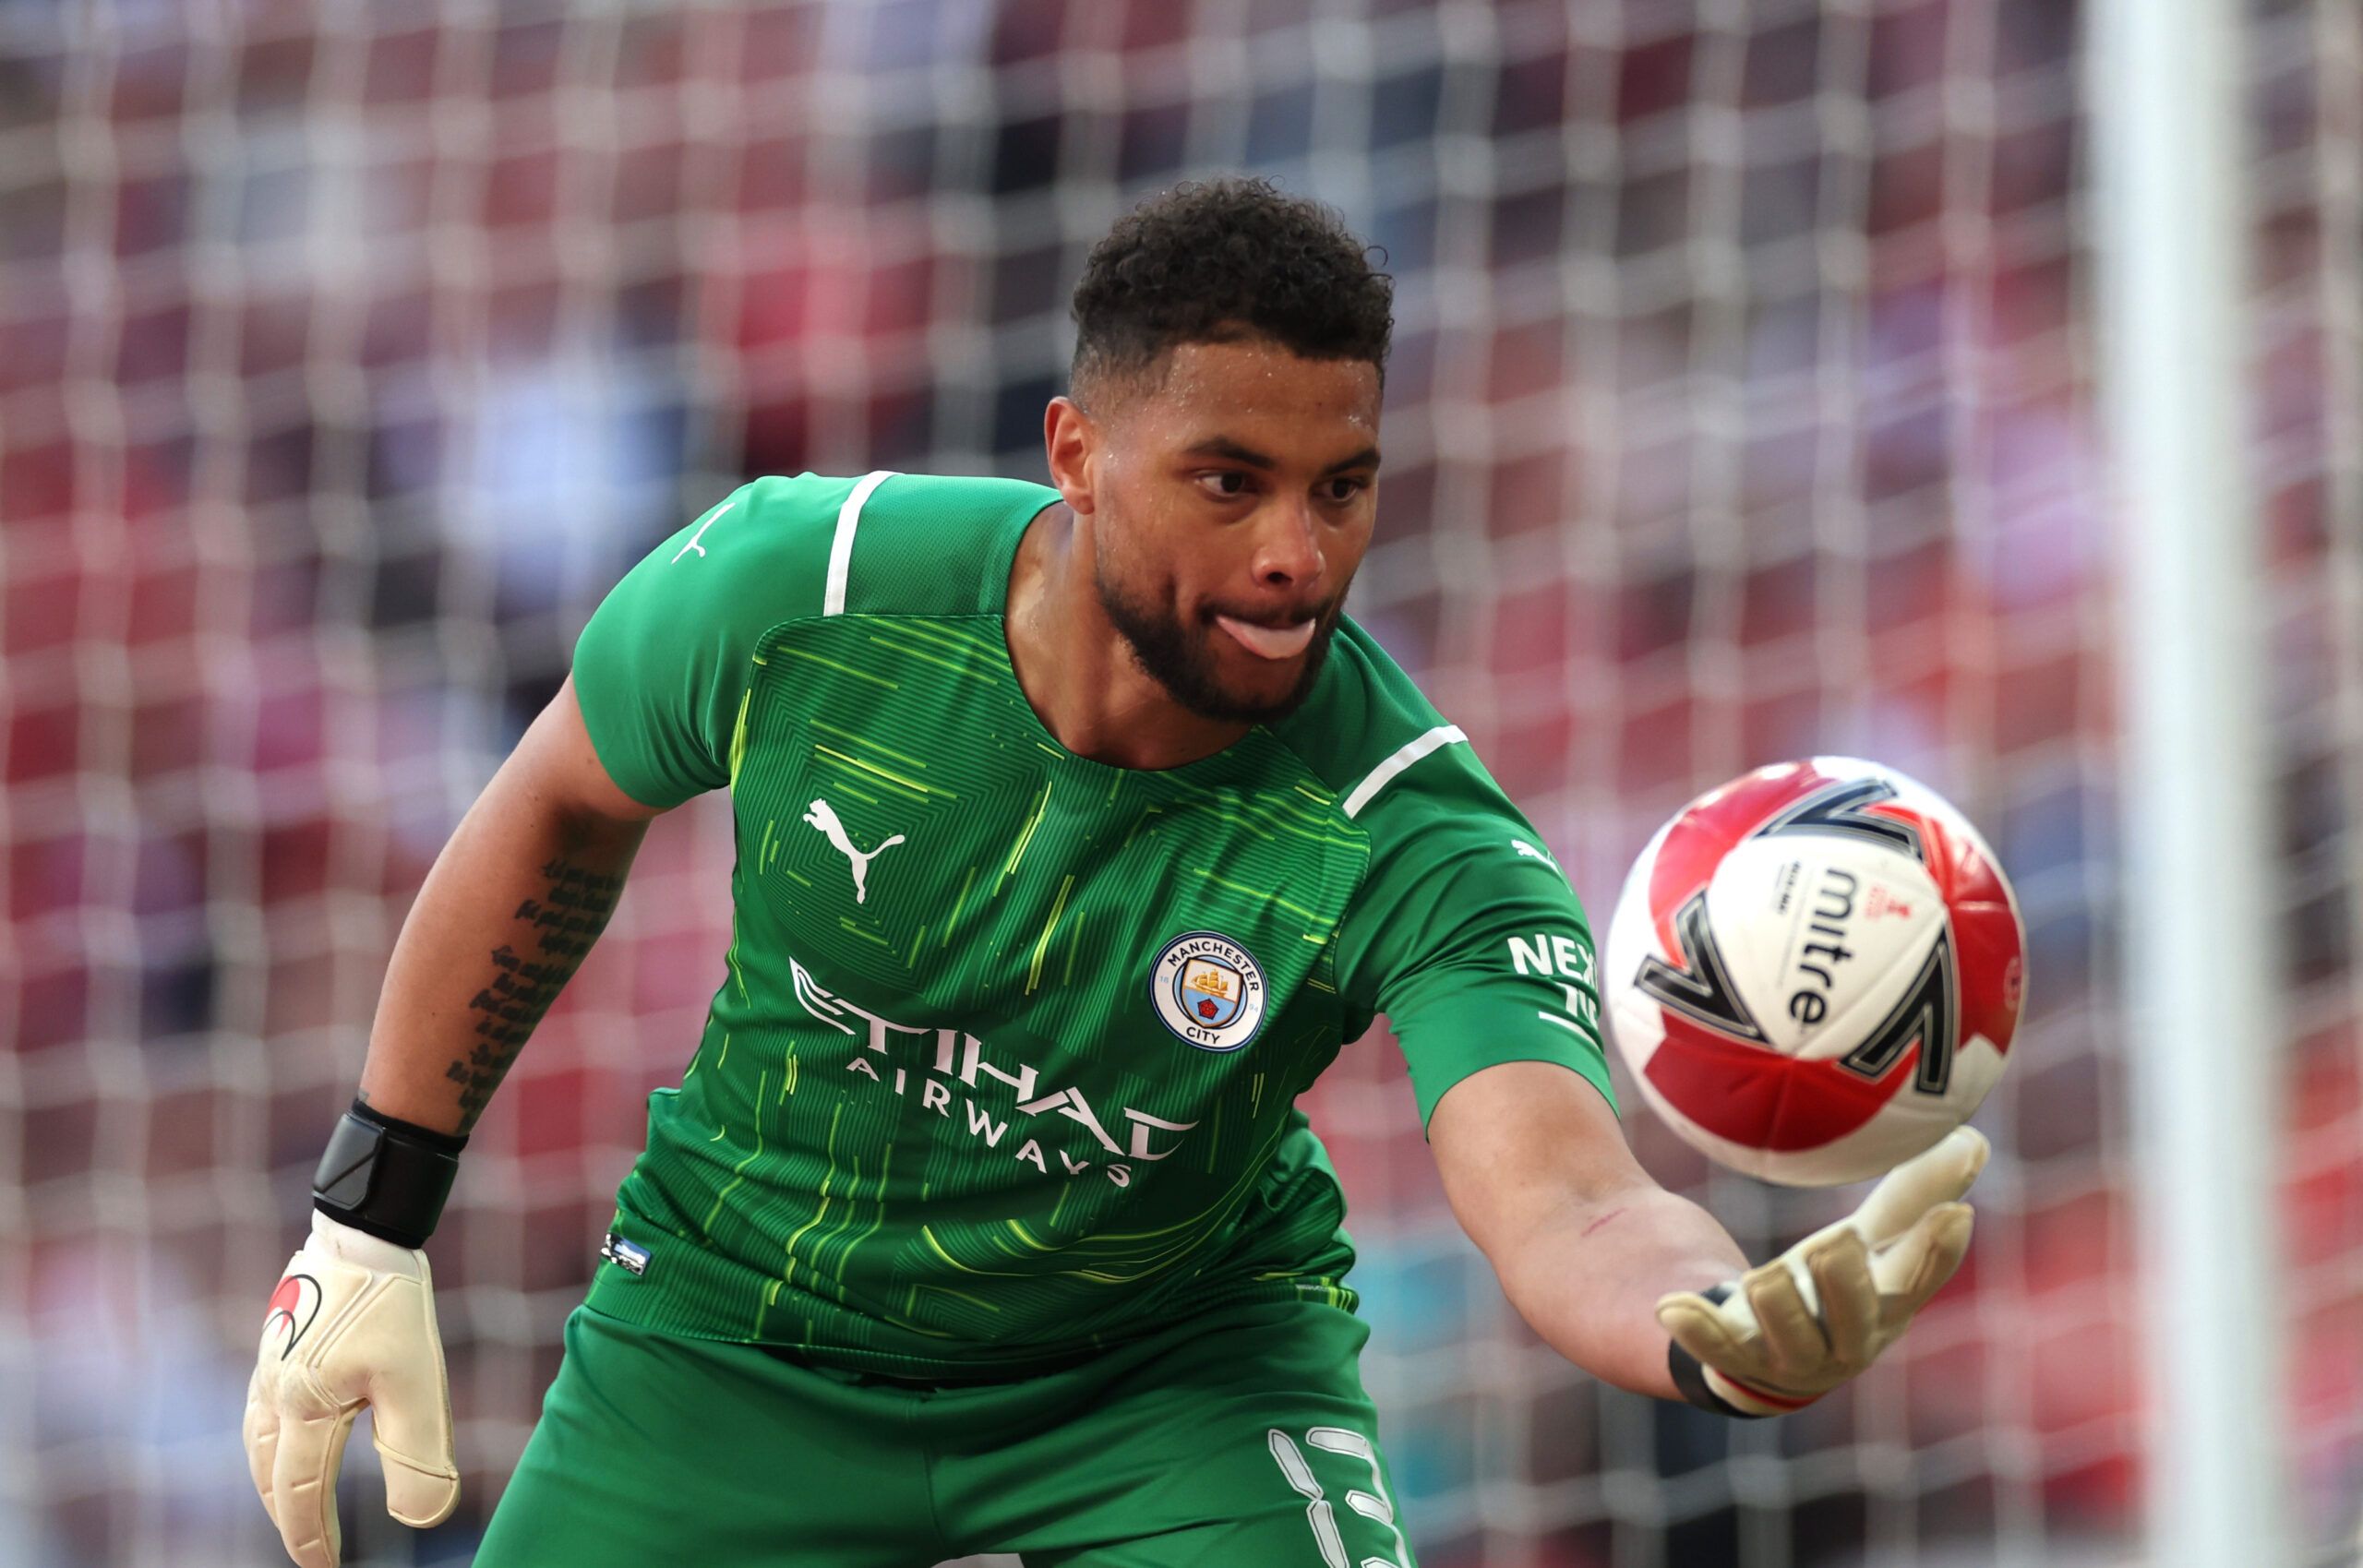 Soccer Football - FA Cup Semi Final - Manchester City v Liverpool - Wembley Stadium, London, Britain - April 16, 2022 Manchester City's Zack Steffen during the match Action Images via Reuters/Carl Recine